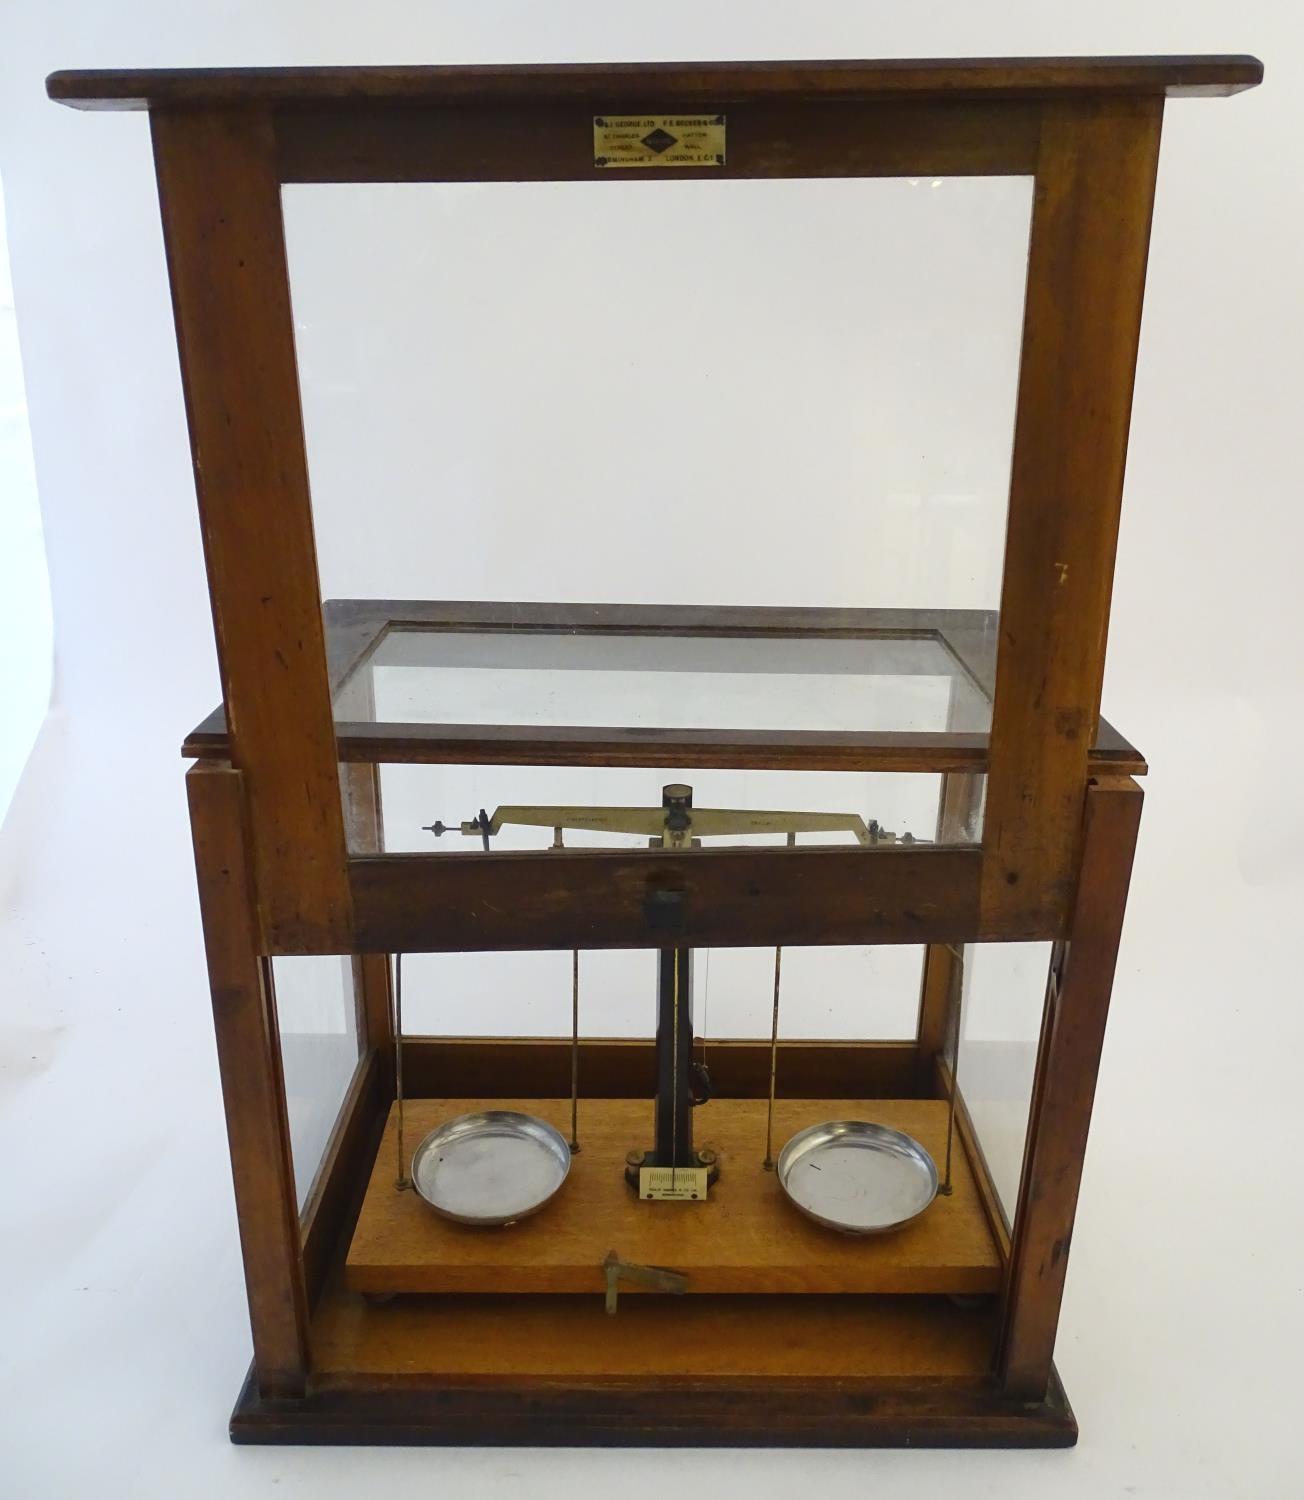 A set of vintage laboratory balance scales by W&J George (Birmingham) and FE Becker & Co (London), - Image 7 of 8